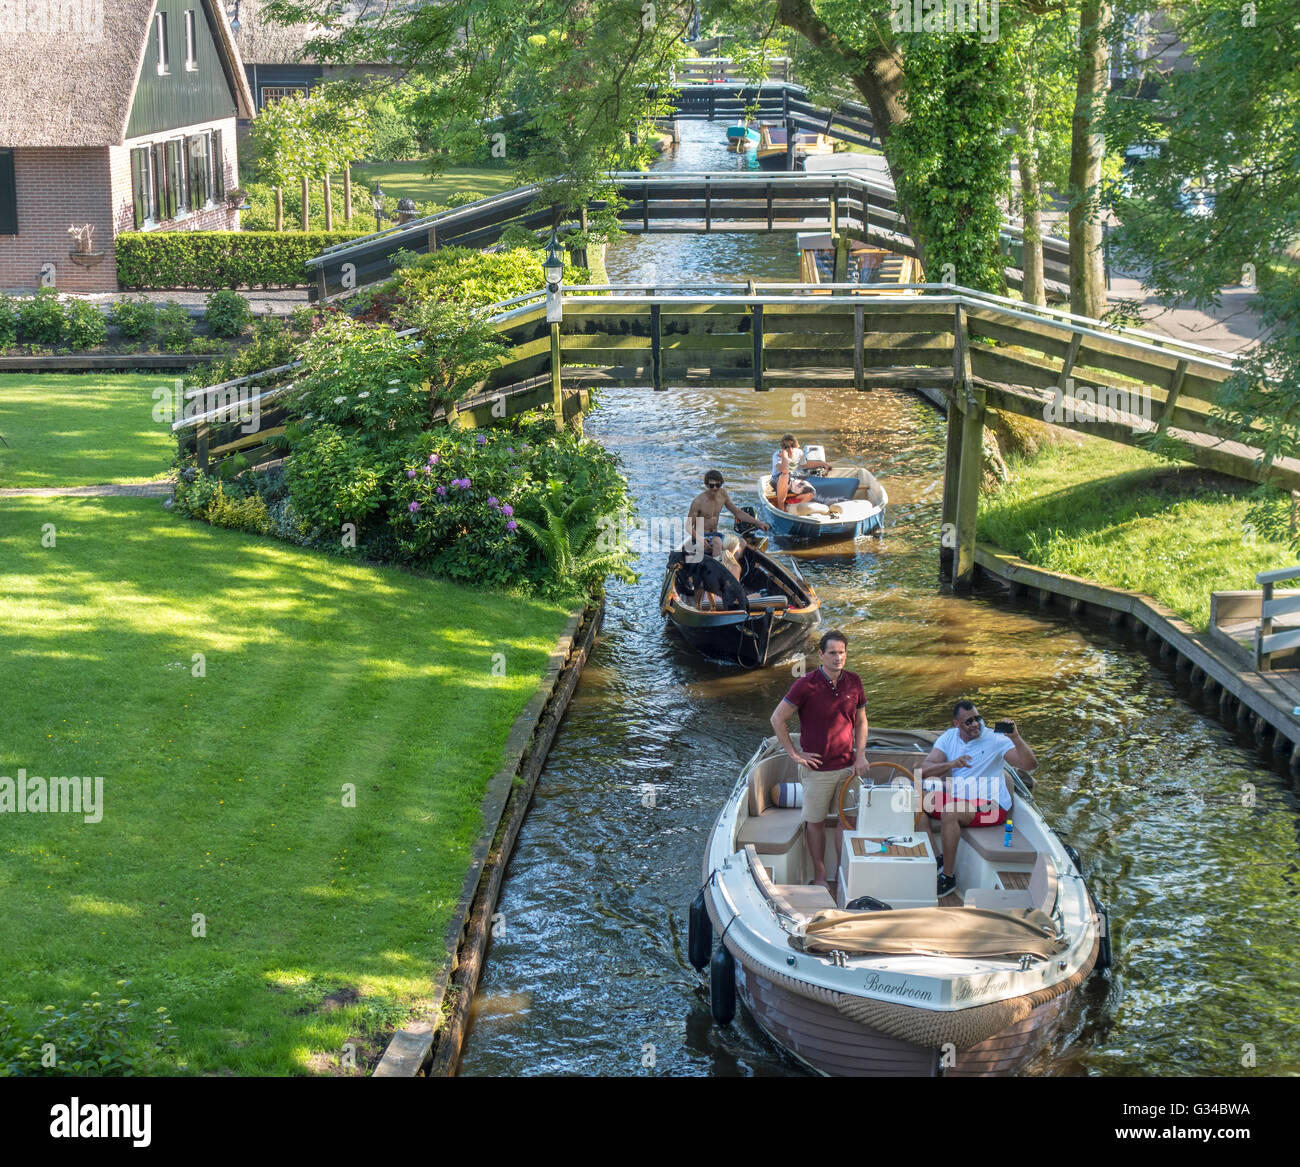 Giethoorn, Netherlands. Boats in the Dorpsgracht or Village Canal with converted farmhouses on islands with private bridges. Stock Photo